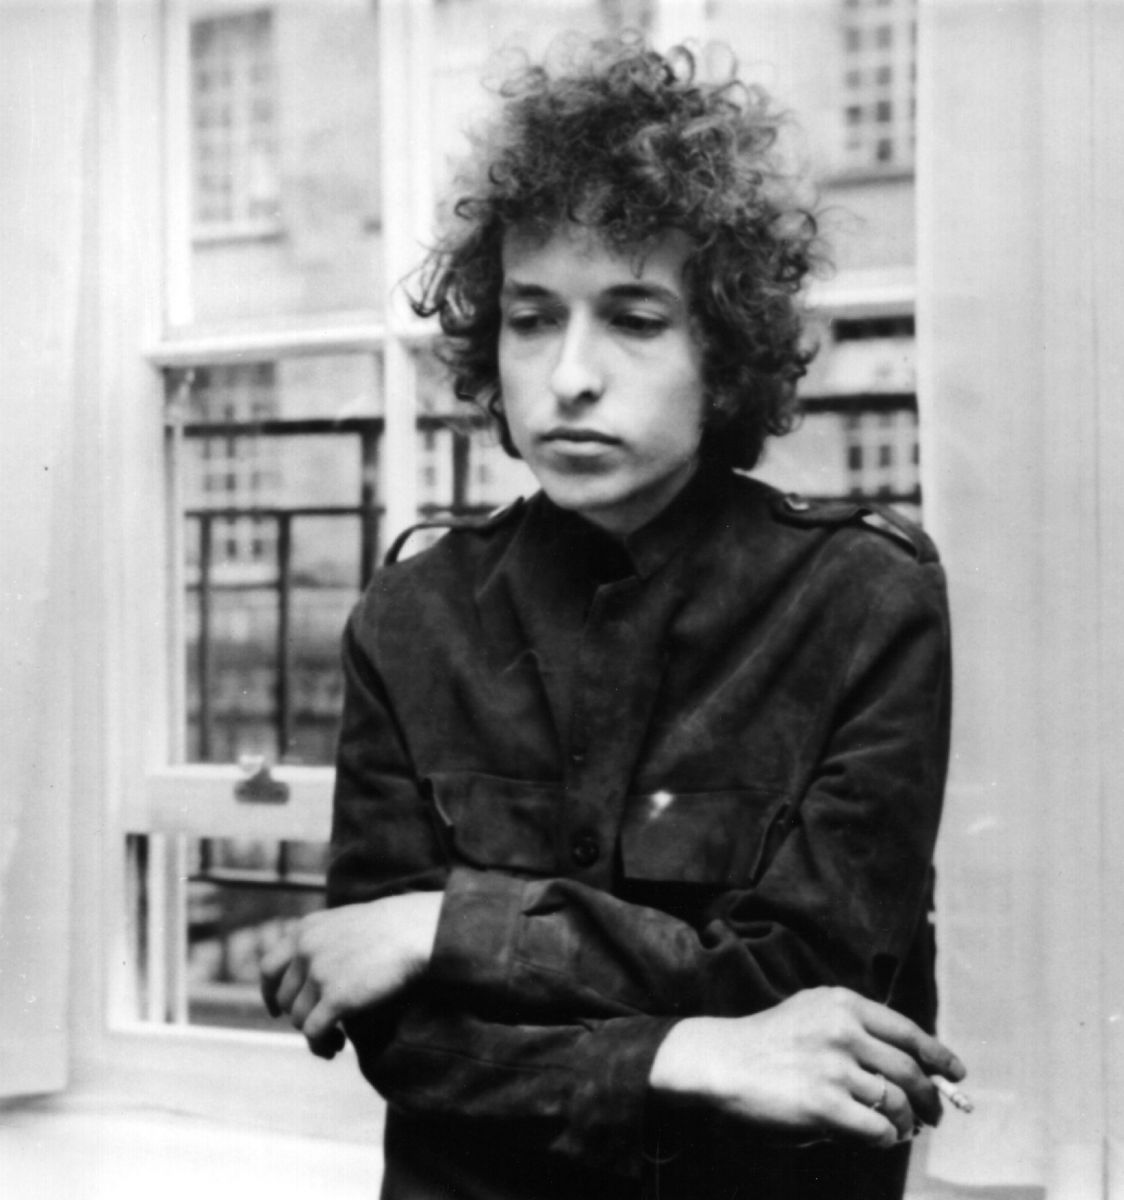 Black and white photograph of a young Bob Dylan in 1968.